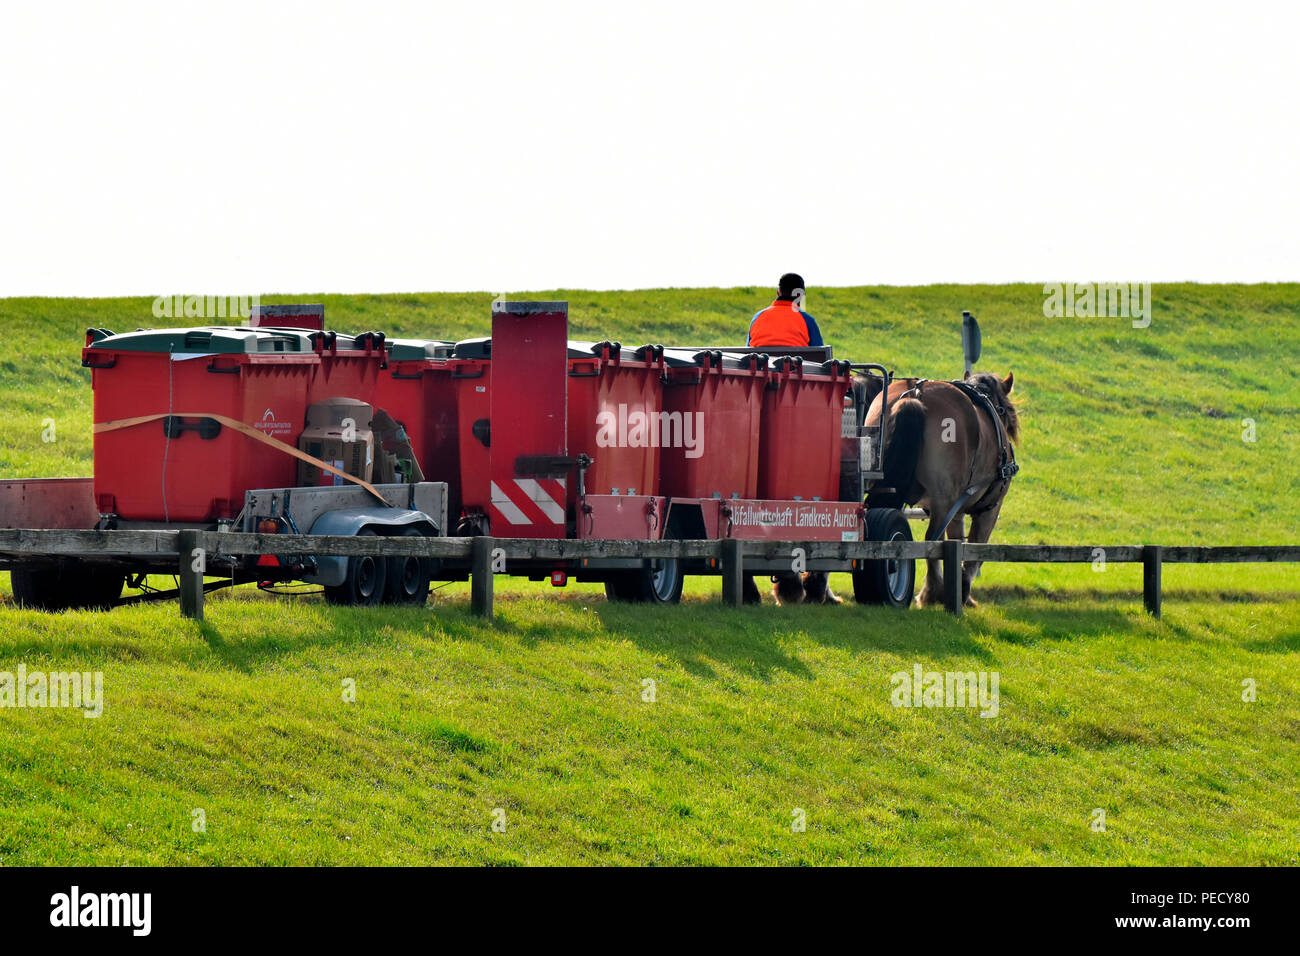 Team of Horses, rubbish collection, Juist, National Park Wadden Sea, Lower Saxony, East Frisian Island, Germany Stock Photo